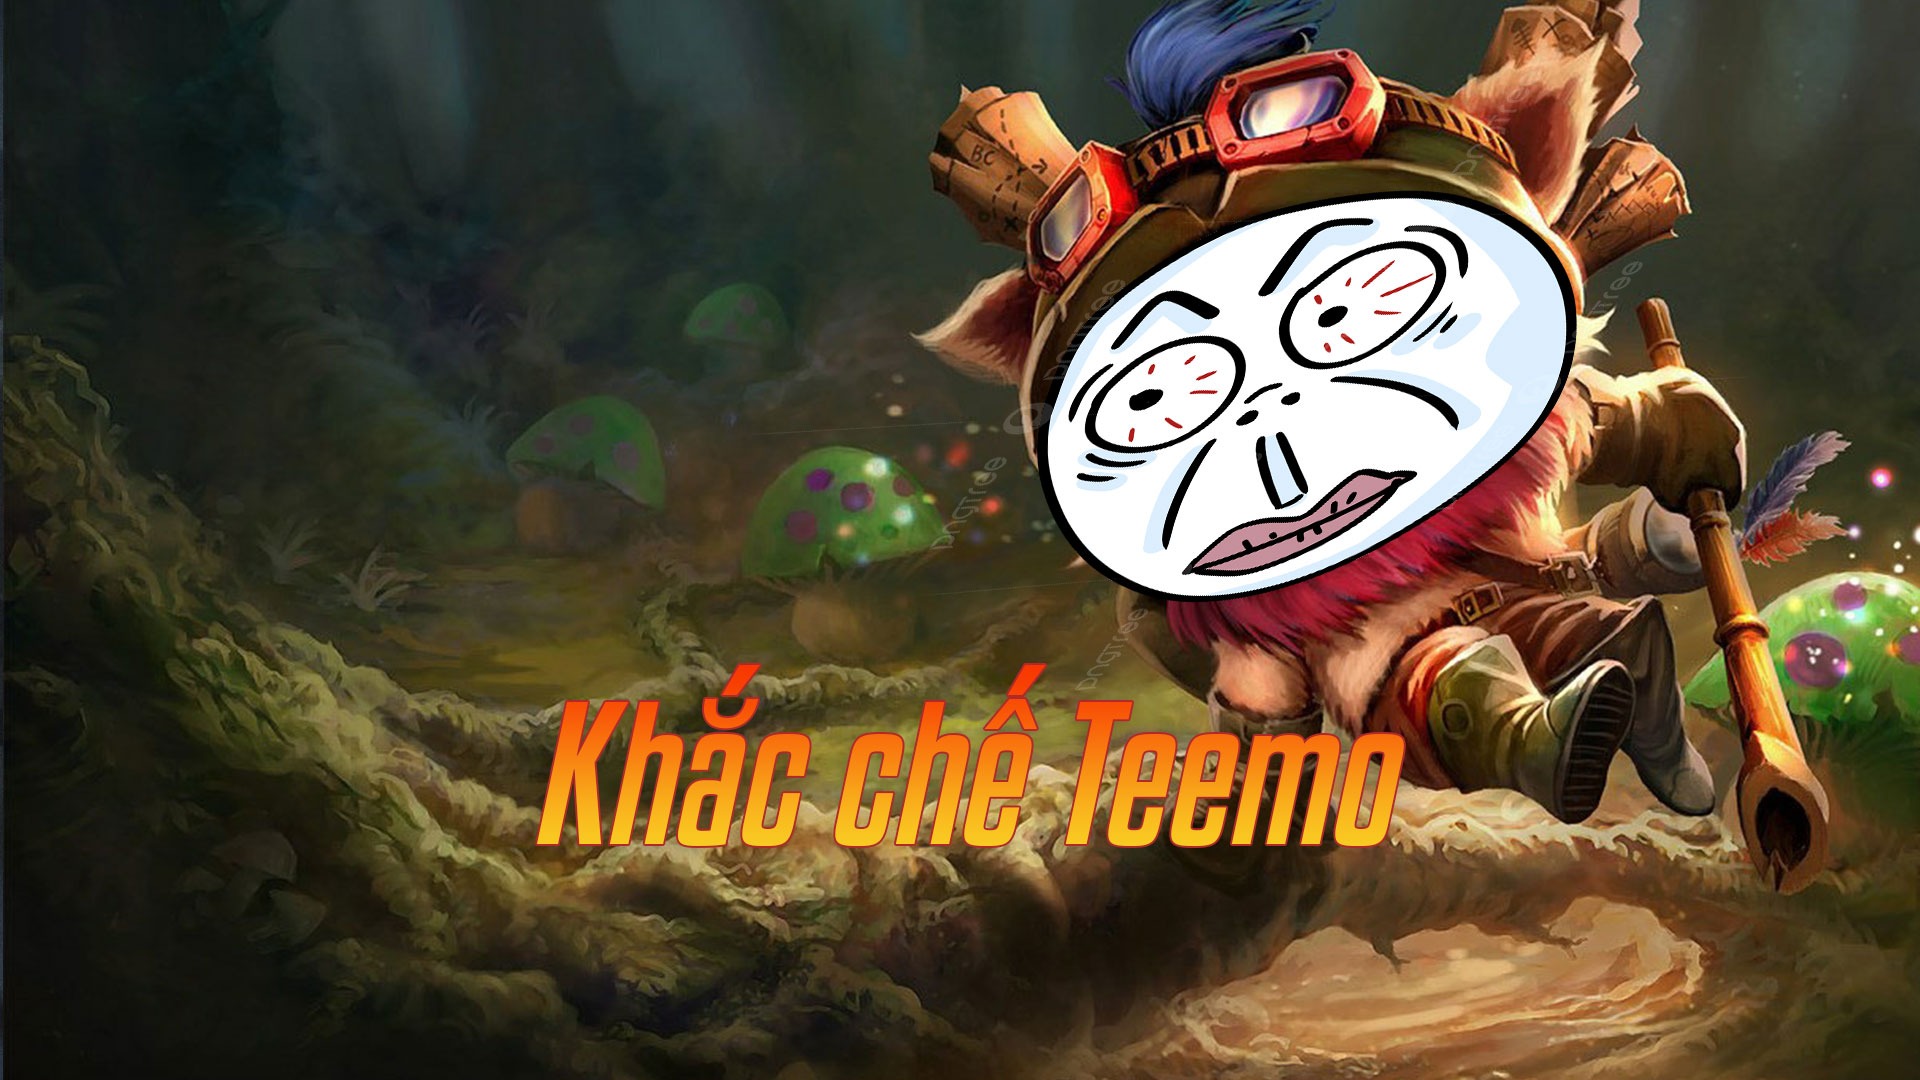 Khắc chế Teemo>